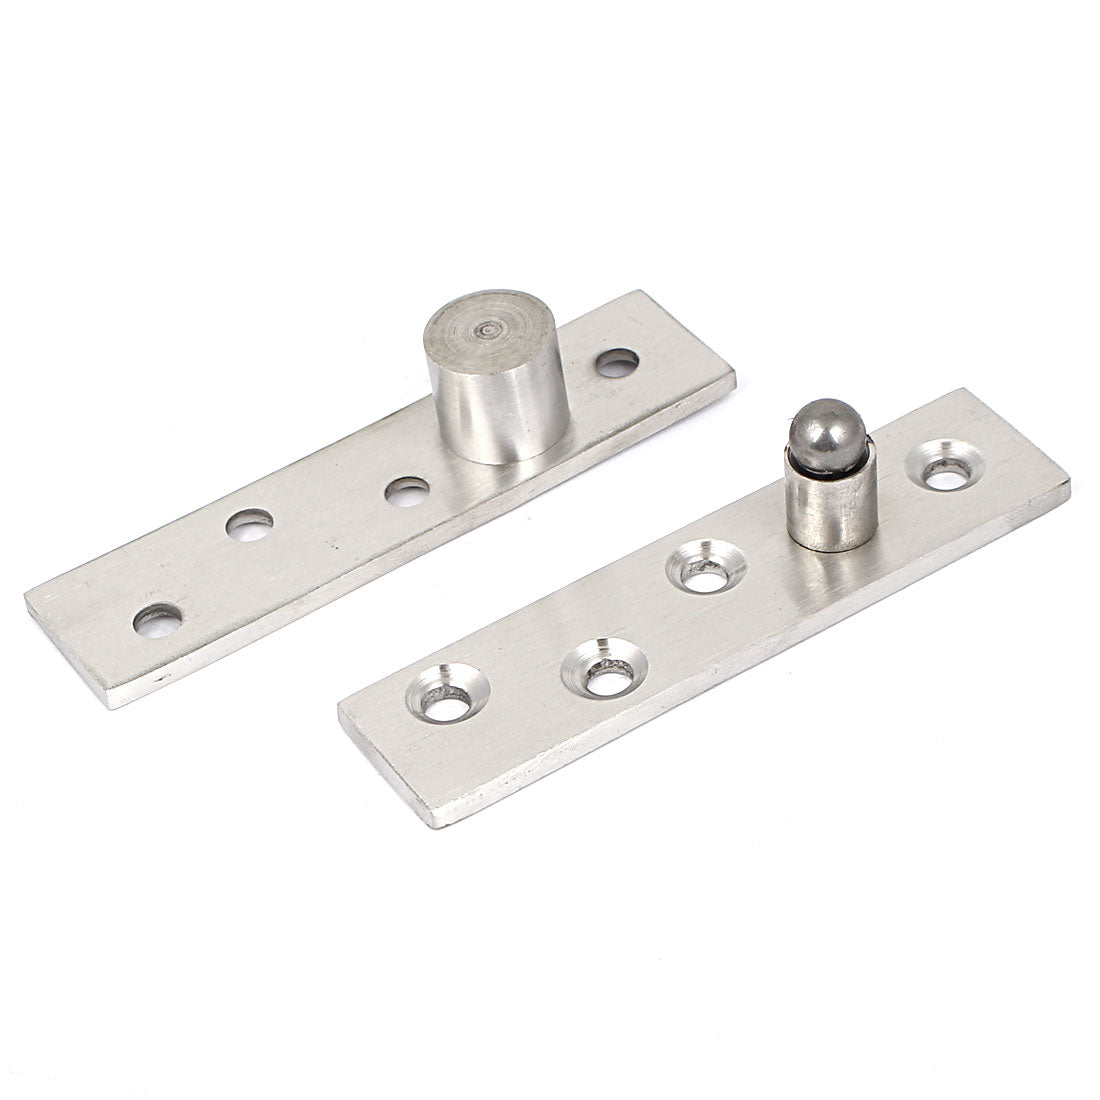 uxcell Uxcell 100mm Length Stainless Steel 360 Degree Door Pivot Hinge Hardware